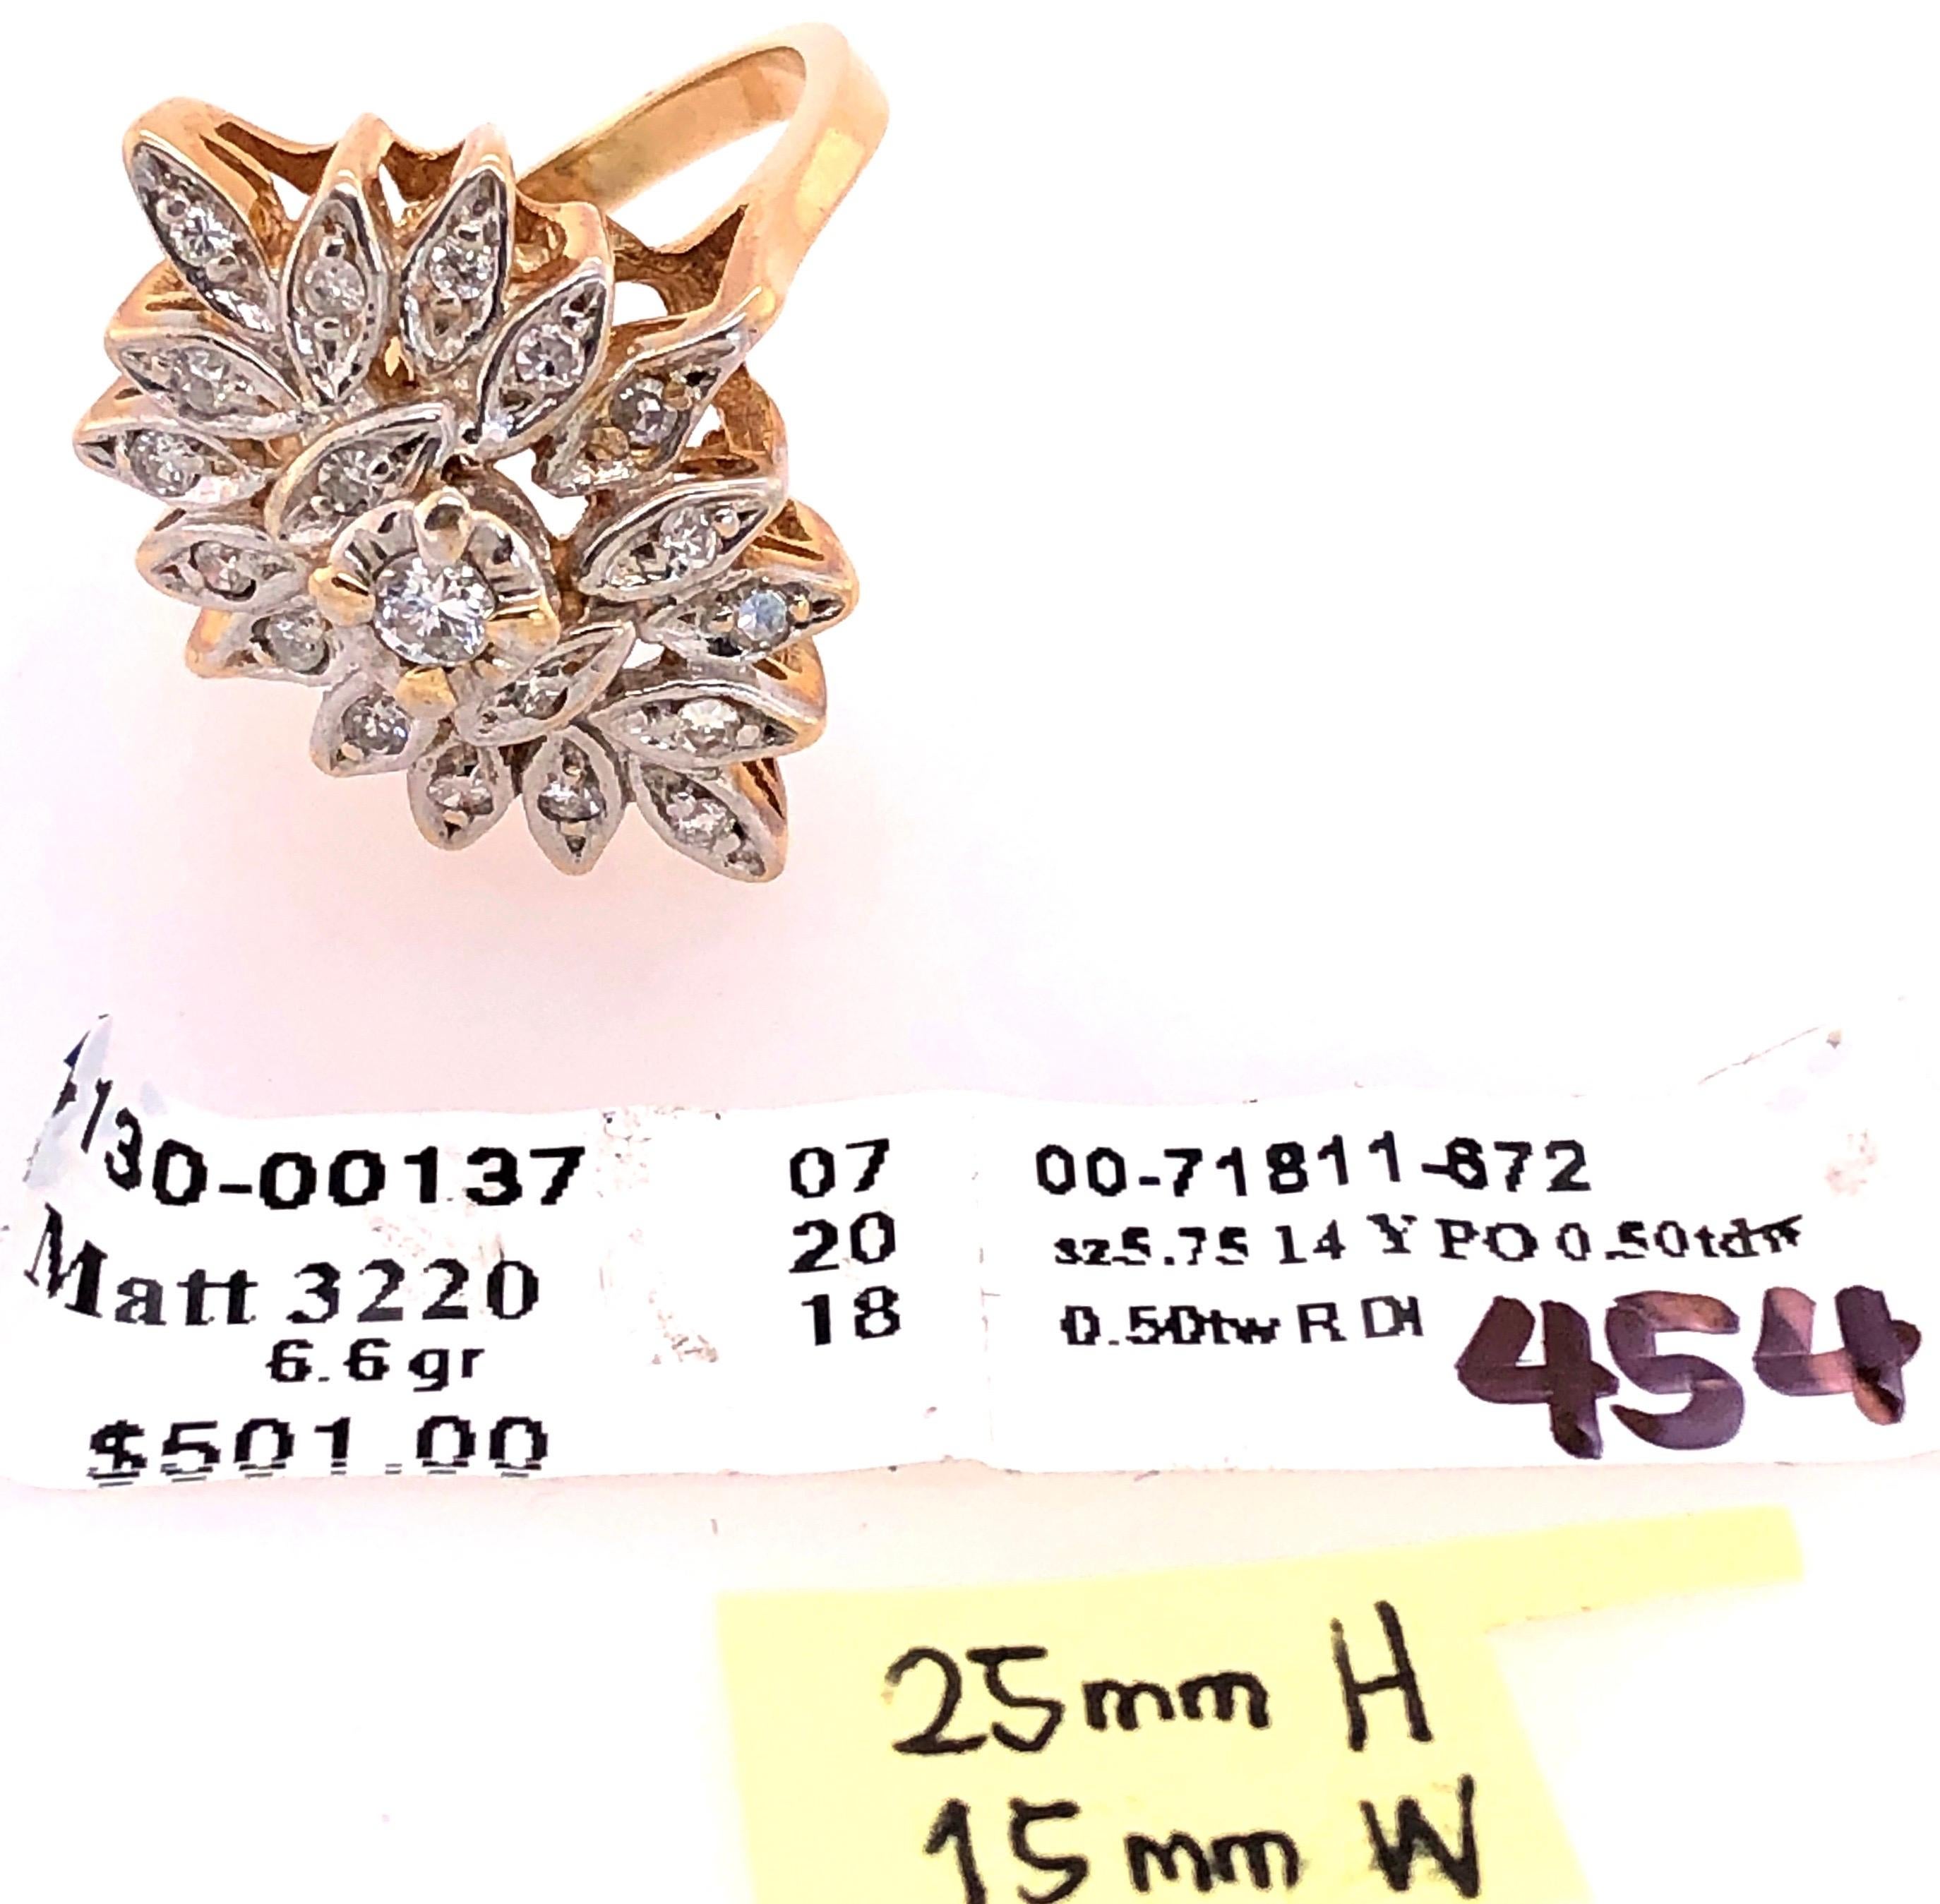 14 Karat Two-Tone White and Yellow Gold with Diamond Cluster Ring 0.50 TDW For Sale 4